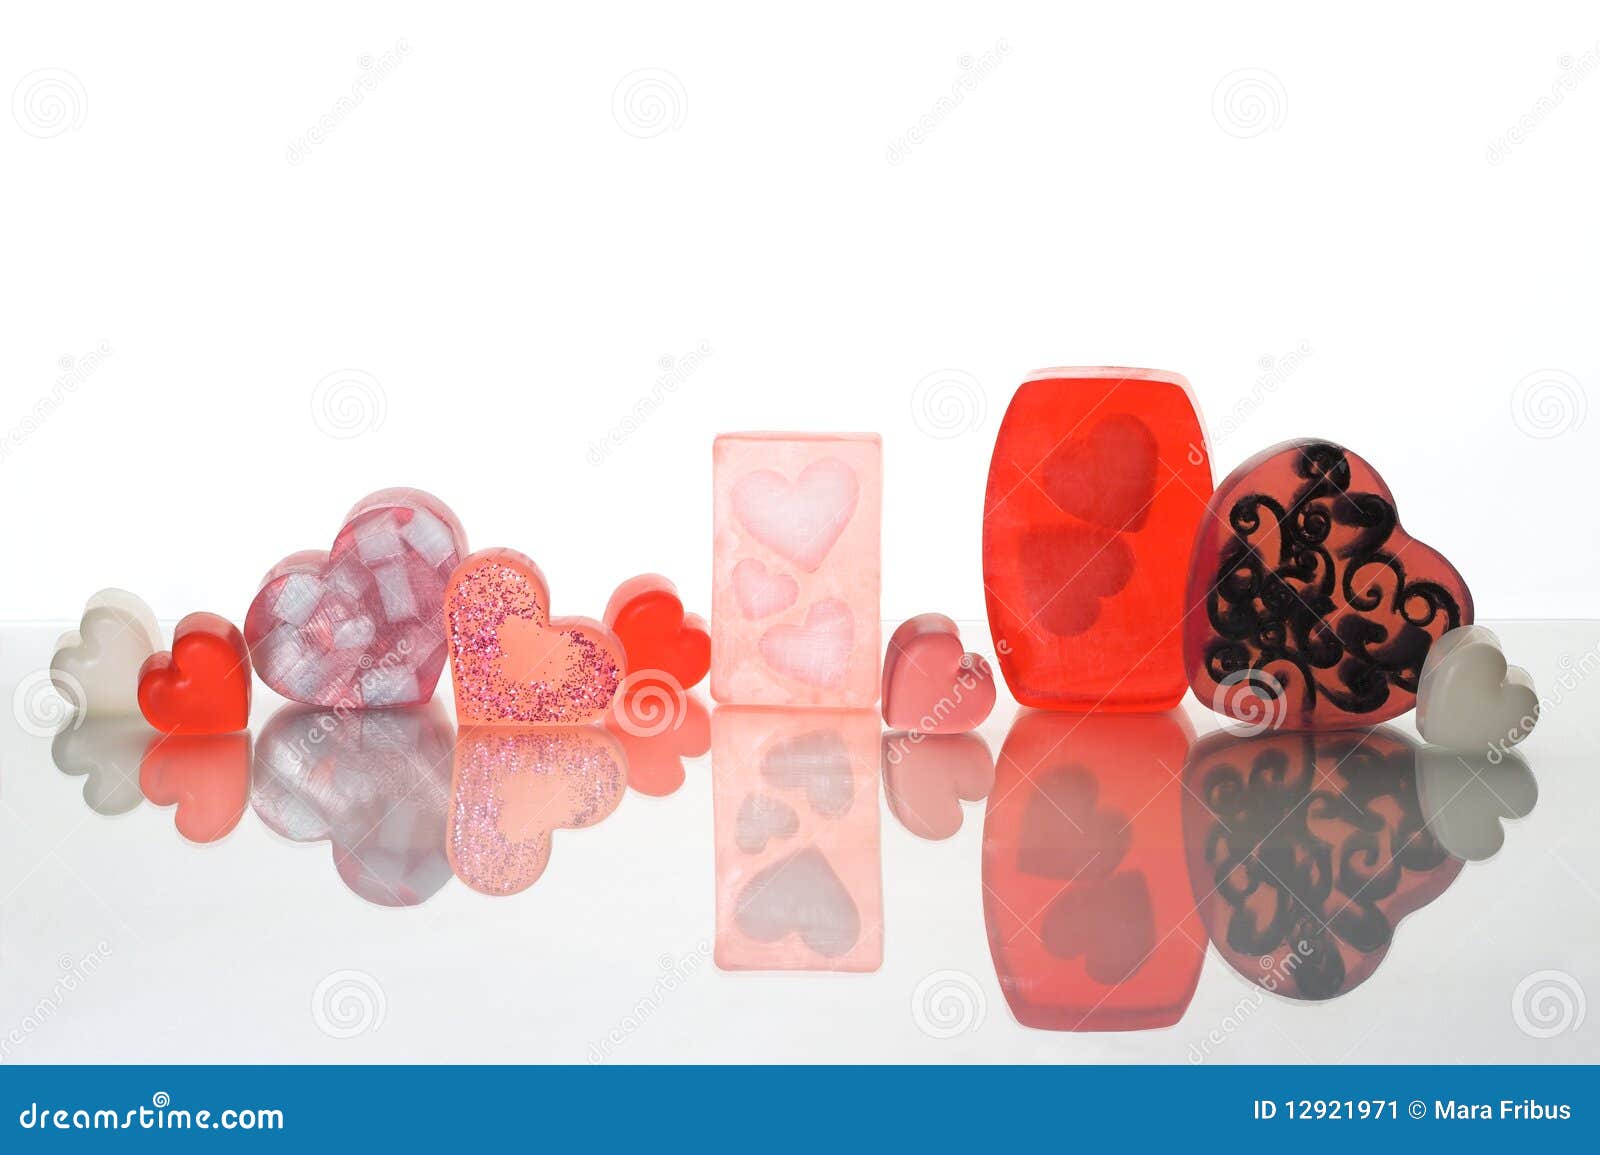 Heart Shaped Soaps on Pink Surface · Free Stock Photo